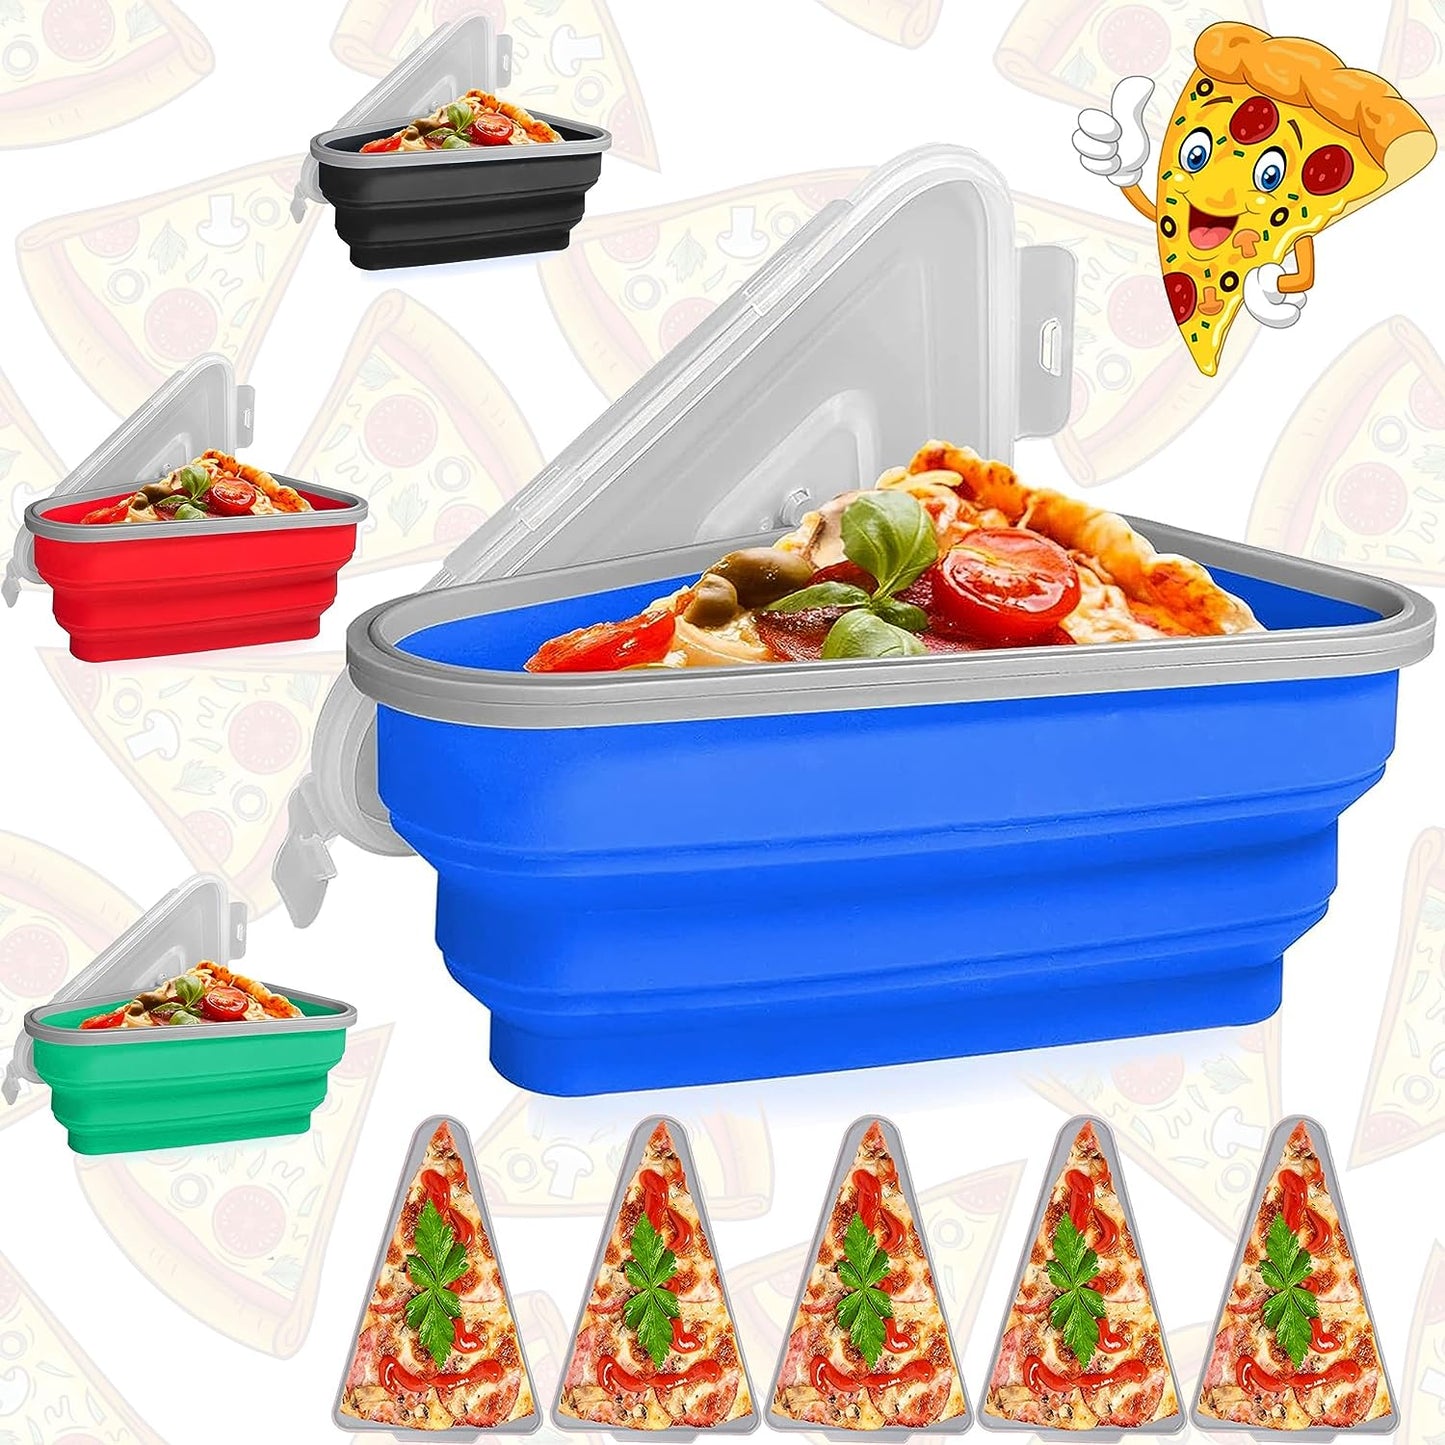 Pizza Storage Container Silicone Collapsible includes 5 trays, Reusable Pizza Storage Container, Saves Fridge Space - Microwave & Dishwasher Safe, Pizza Slice Pack Storage Container Expandable, Leftover Pizza Slice Storage Container Saver, Silic